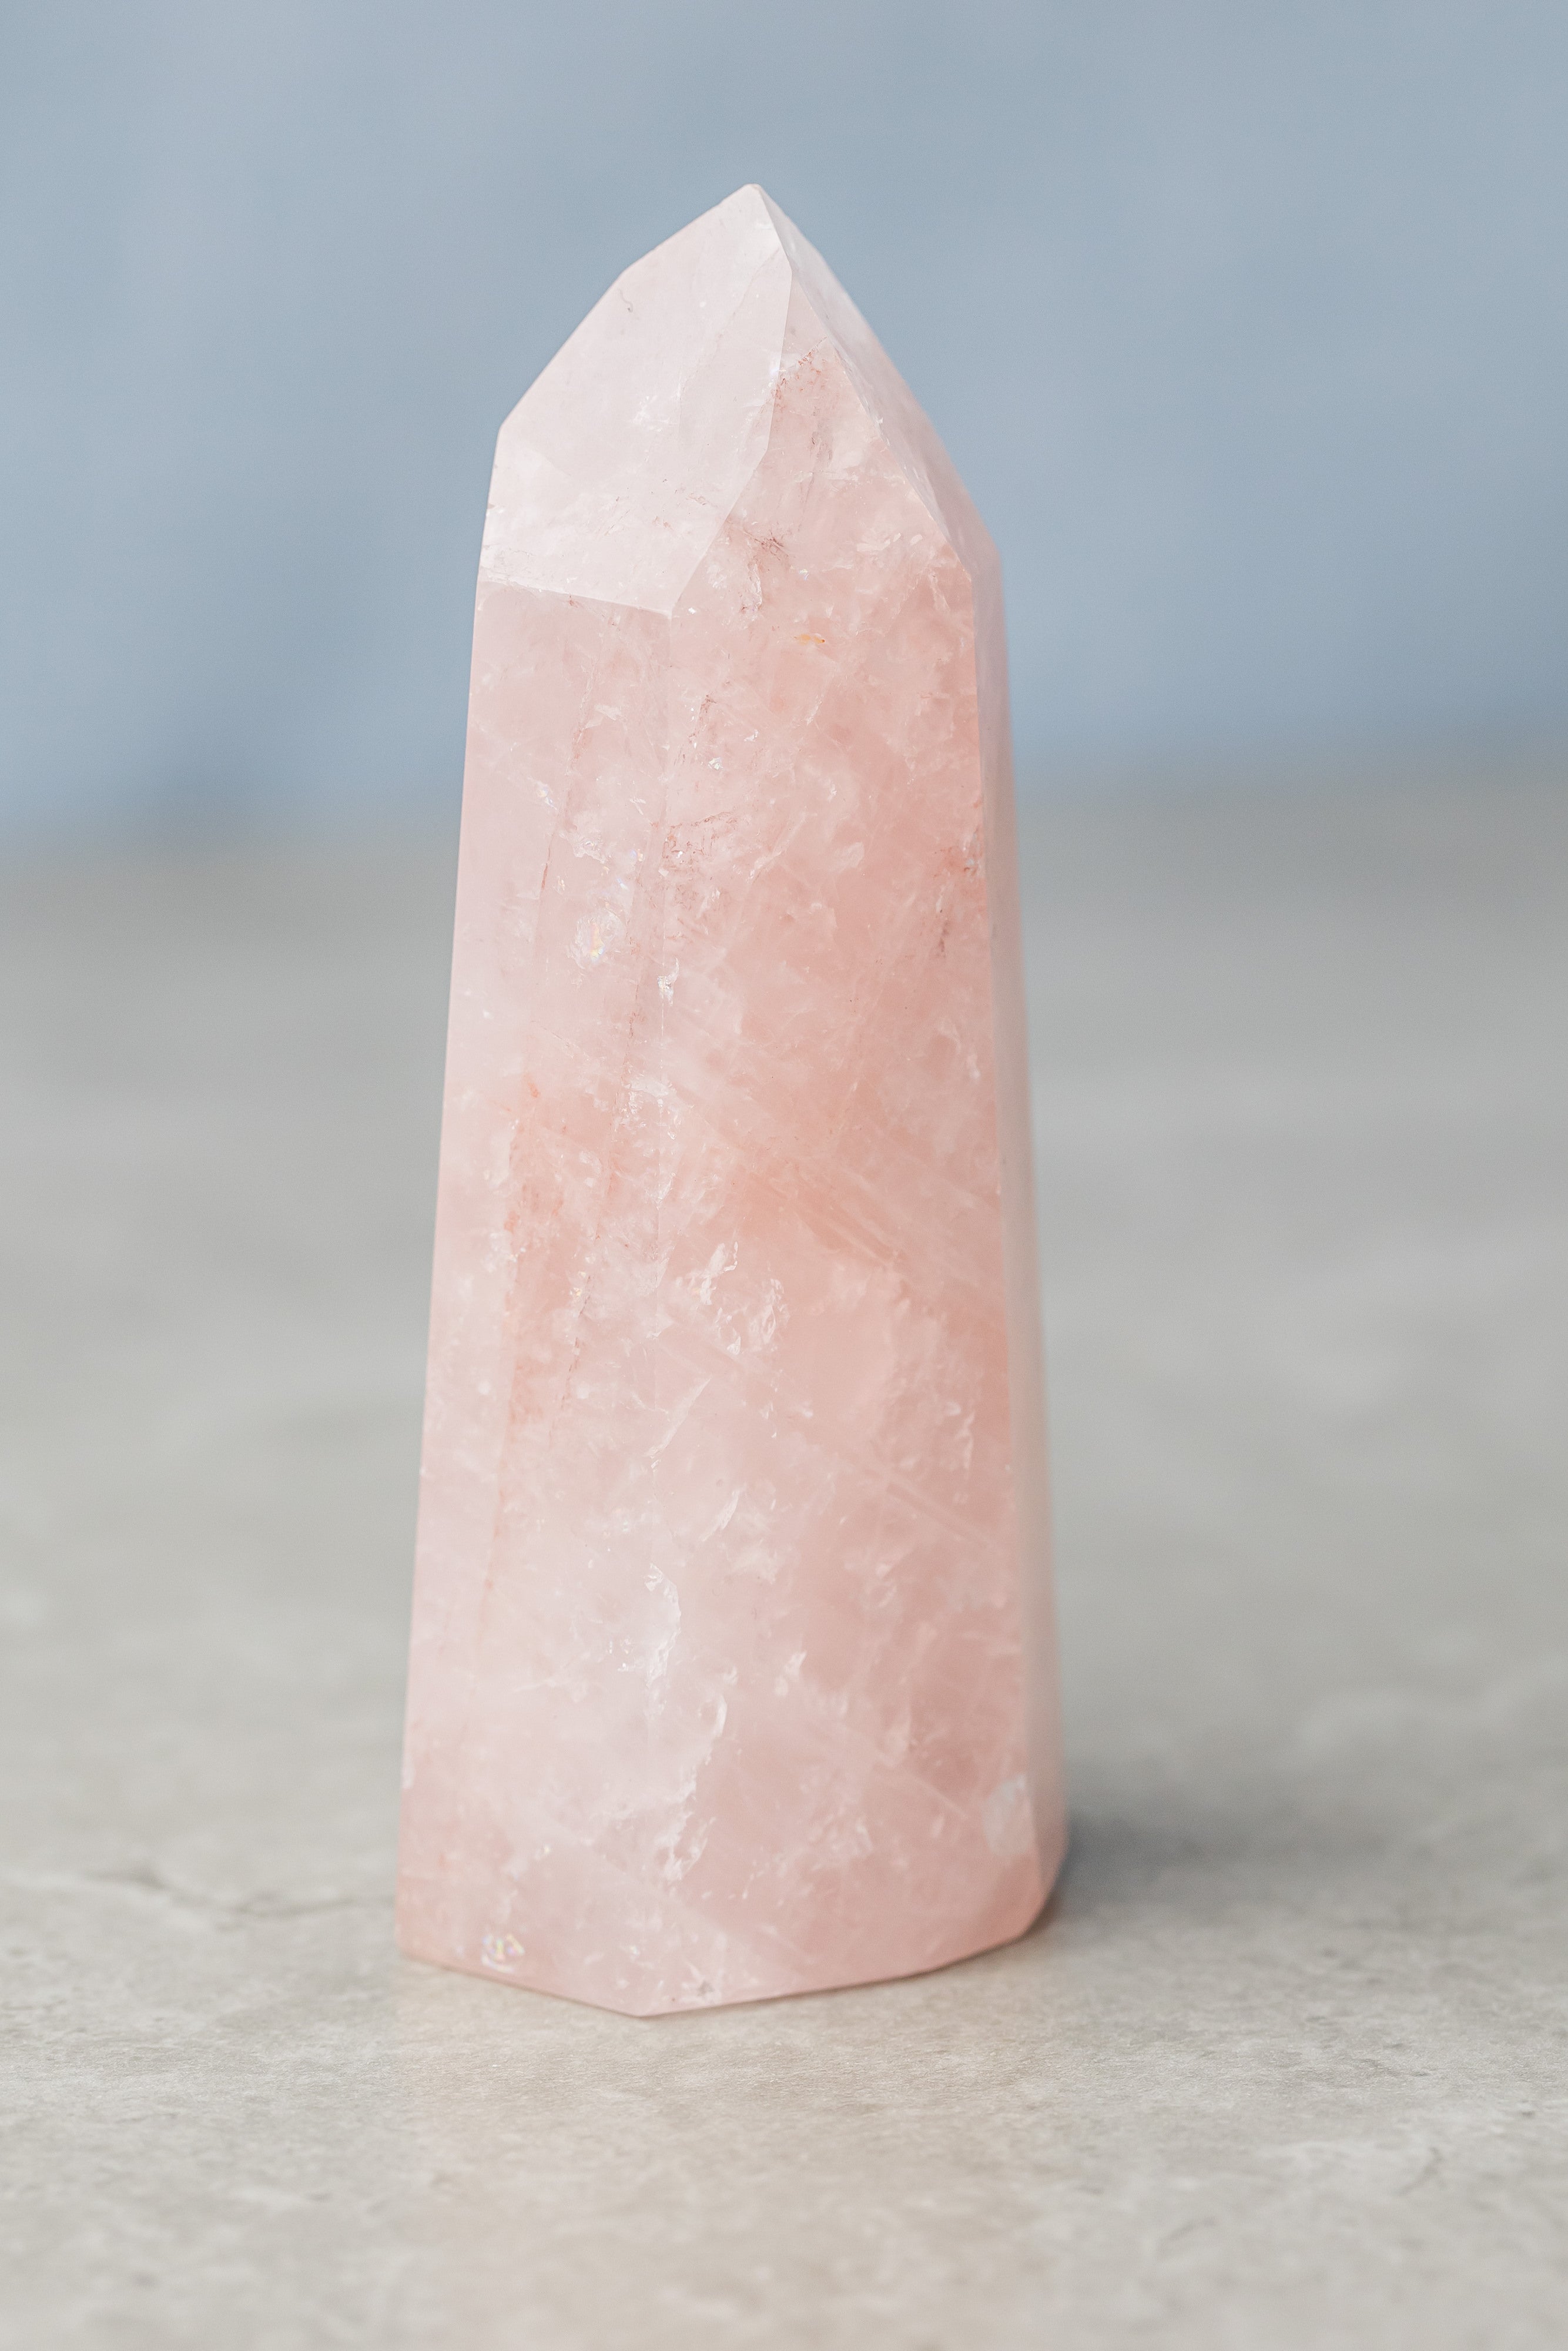 Gifting Rose Quartz: The Power of Intention and Meaning